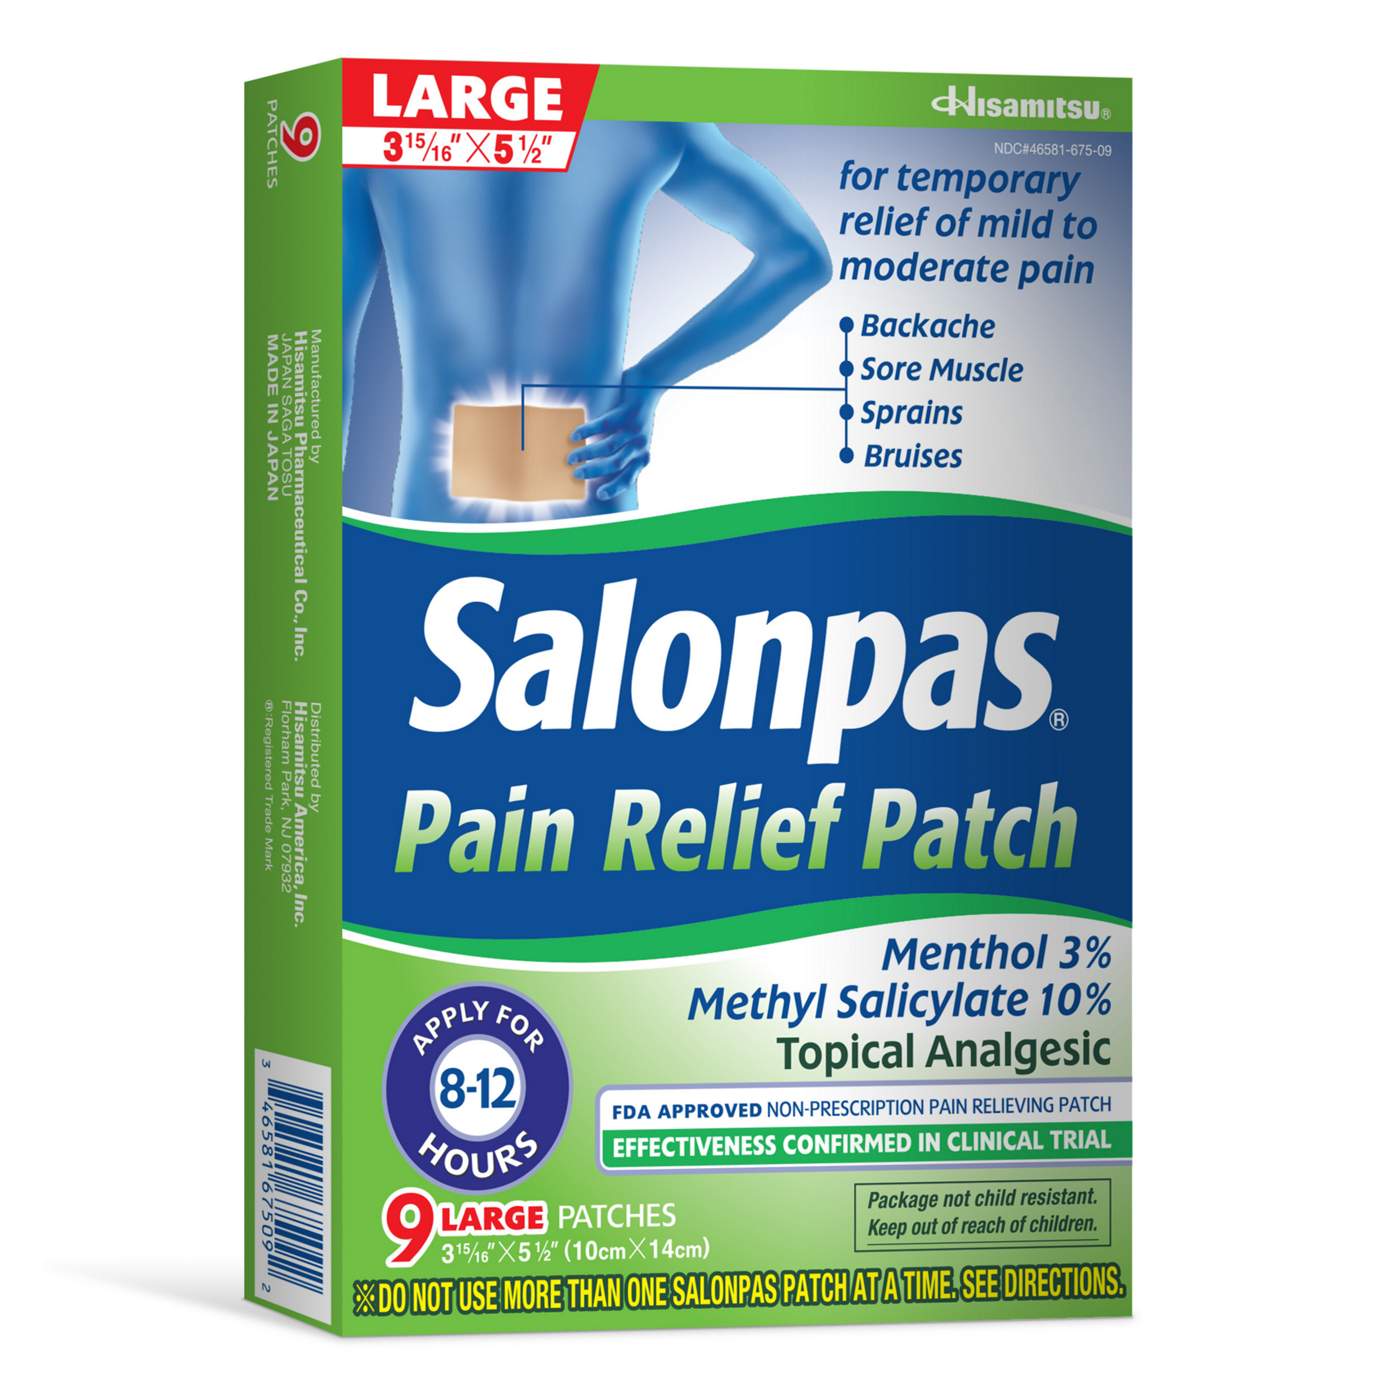 Salonpas Pain Relief Patches - Large; image 1 of 5